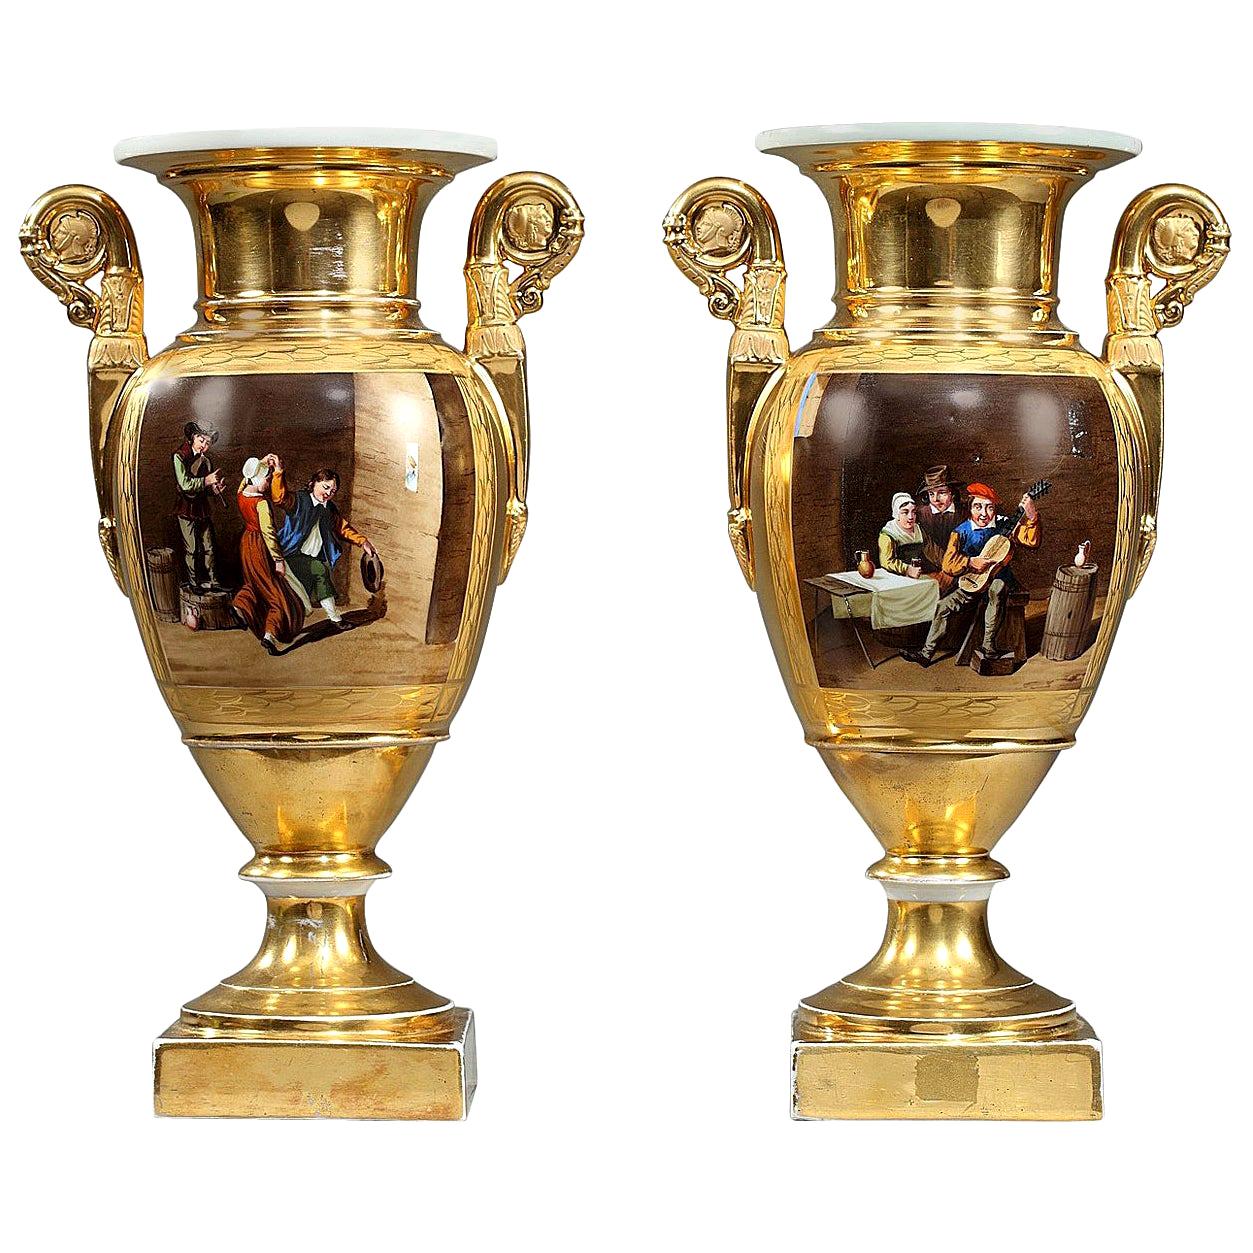 Early 19th Century Empire Porcelain Vases with Cabaret Scenes